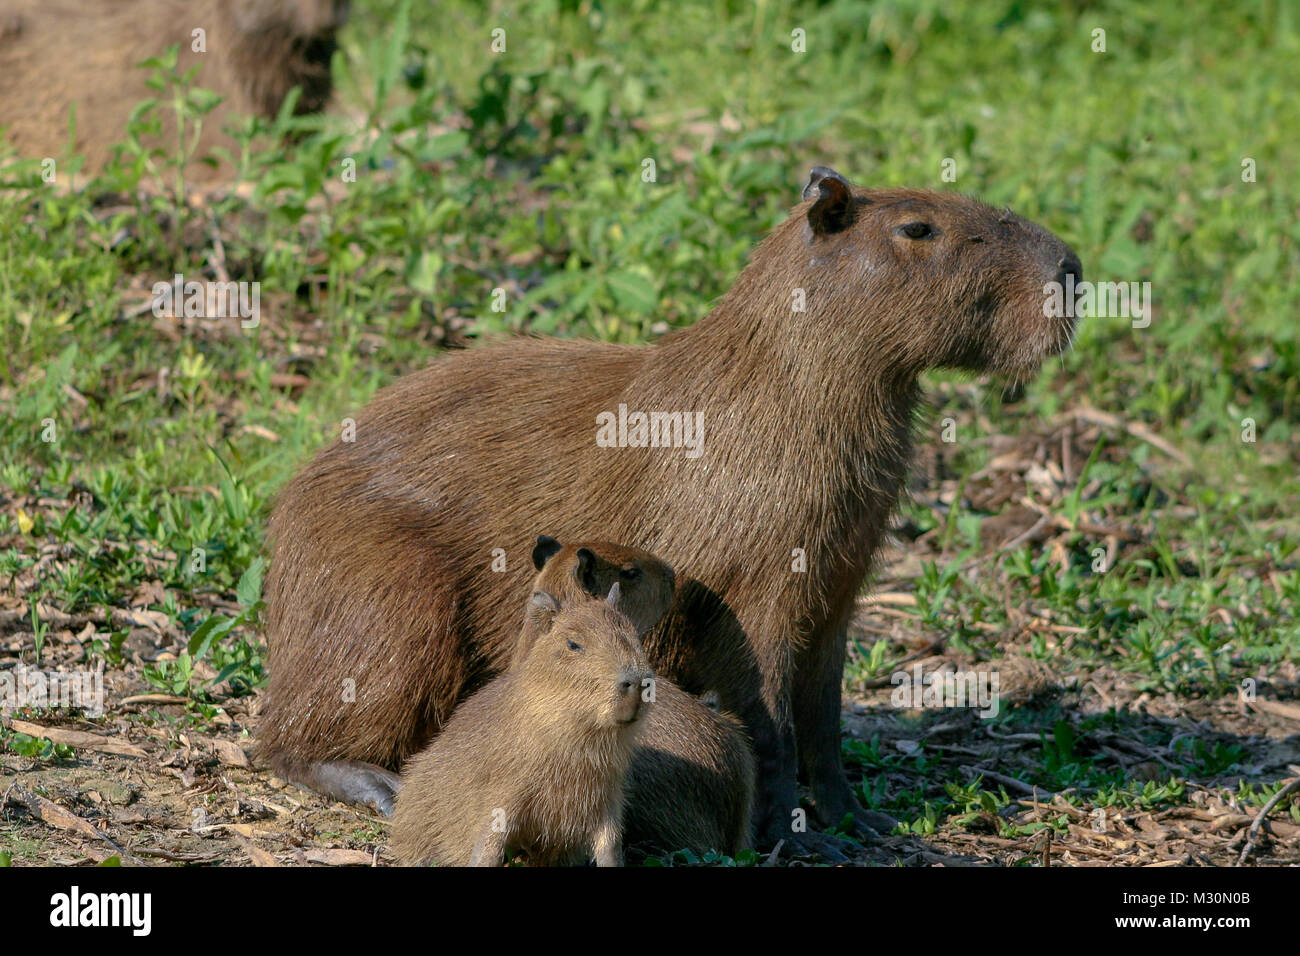 Capybaras (Hydrochoerus hydrochaeris), native to South America, are the largest rodent in the world. Stock Photo